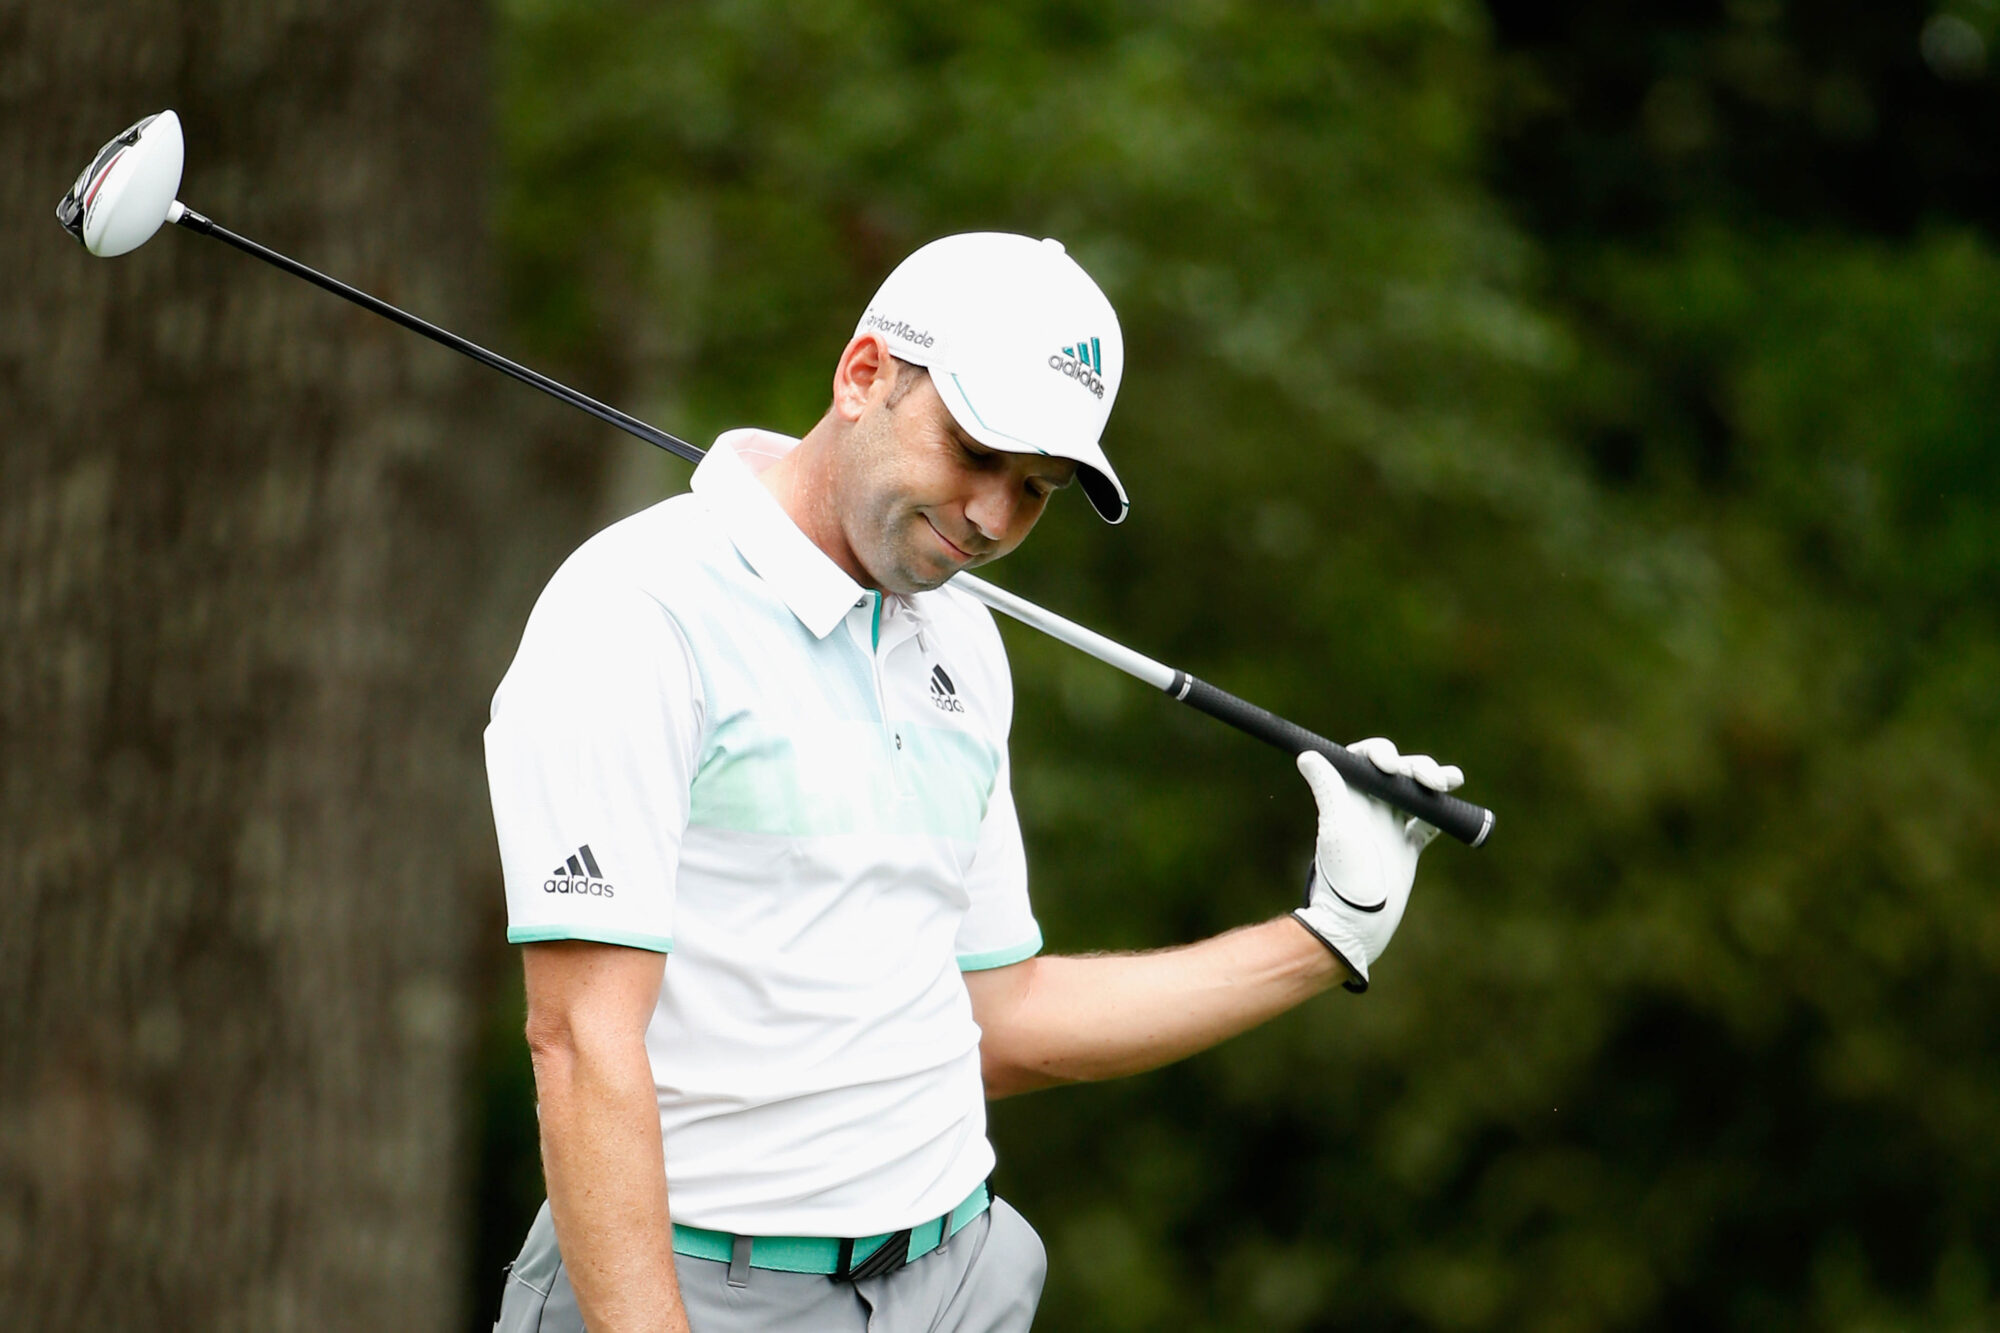 The Masters cut rule: How is the cut determined at Augusta?